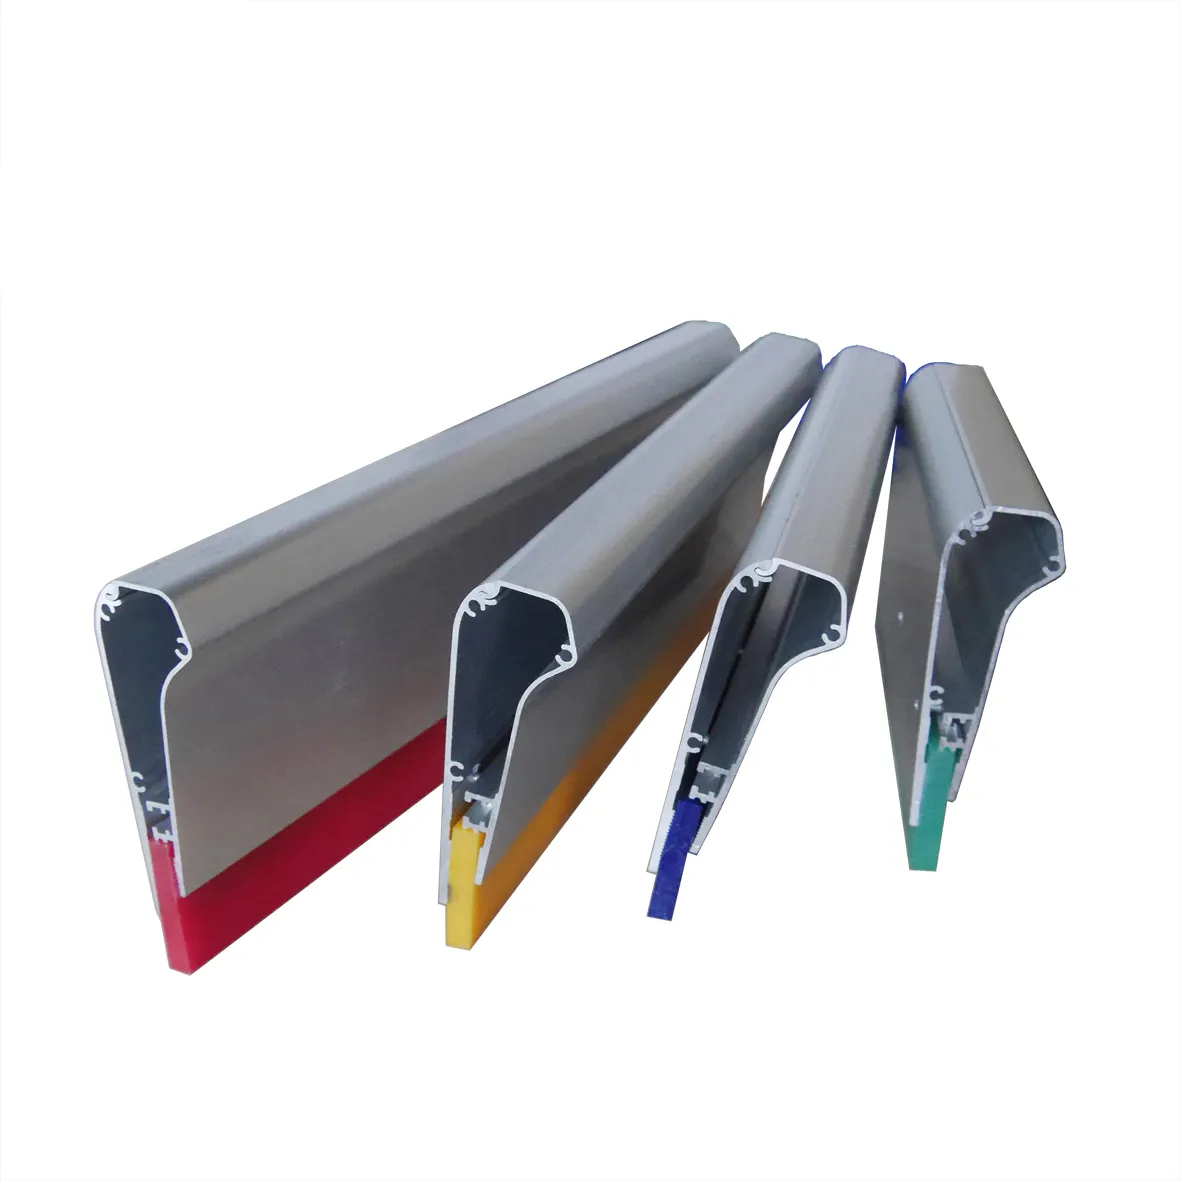 Doyan High Quality Aluminium Alloy Squeegee Handle For Screen Printing